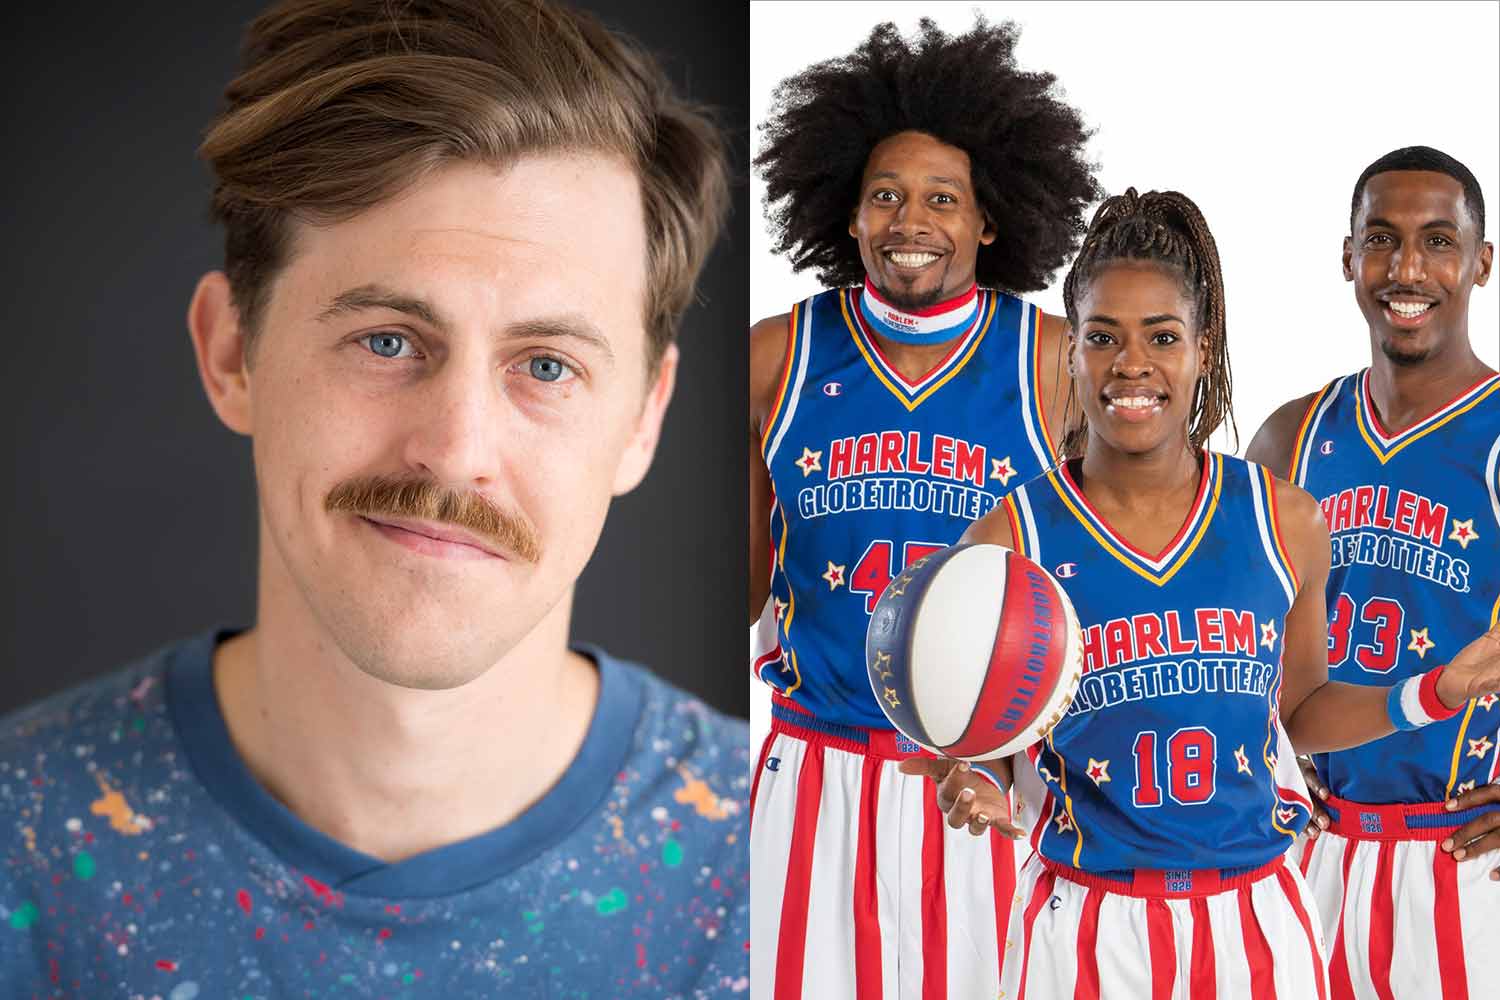 A Look at Harlem Globetrotters Uniforms